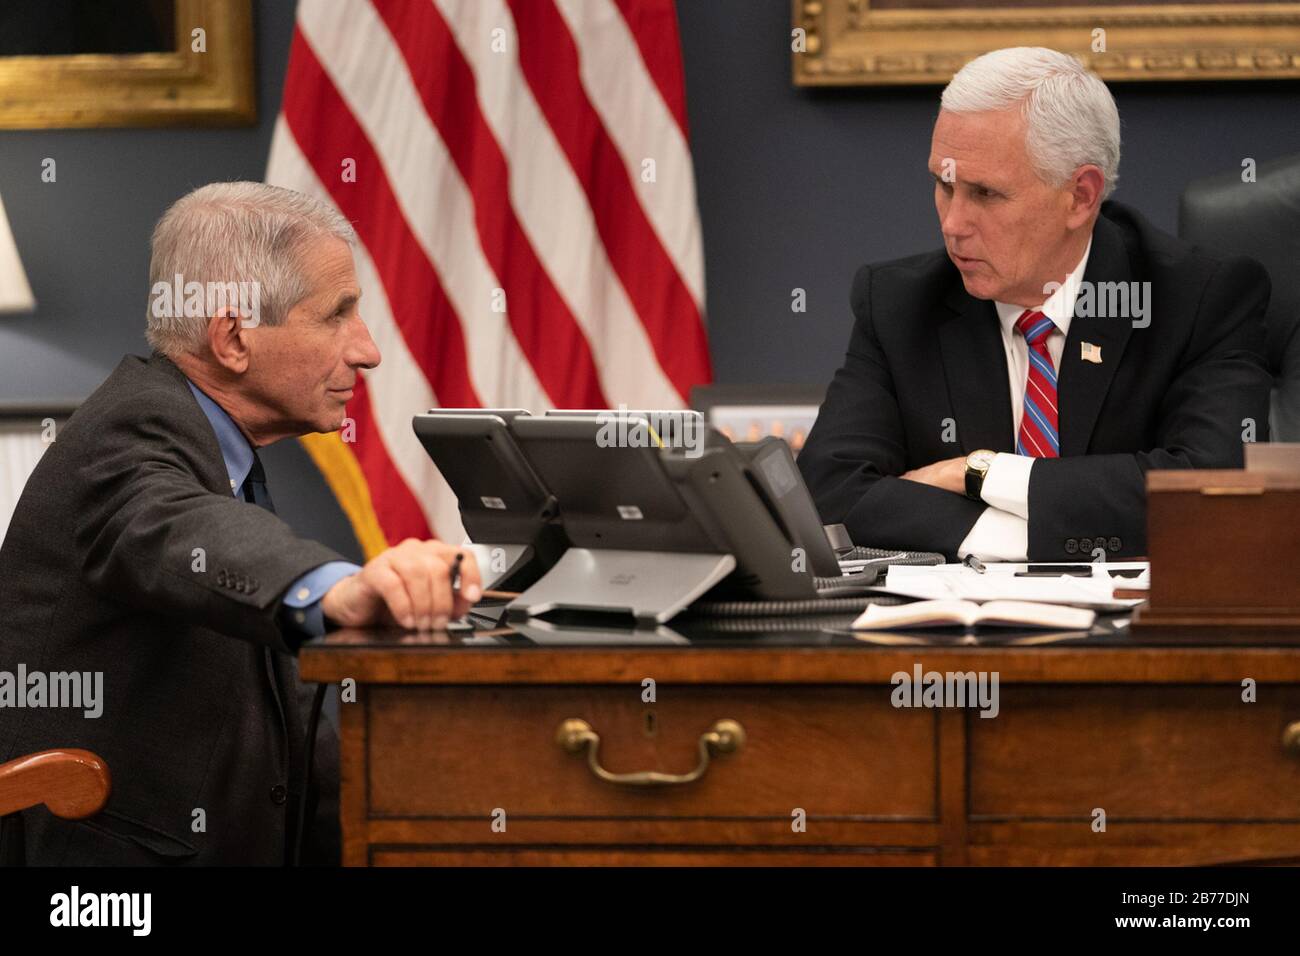 Washington, United States Of America. 11th Mar, 2020. Vice President Mike Pence meets with Dr. Anthony S. Fauci, Director of the National Institute of Allergy and Infectious Diseases Wednesday, March 11, 2020, in his West Wing Office of the White House. People: Vice President Mike Pence, Dr. Anthony S. Fauci Credit: Storms Media Group/Alamy Live News Stock Photo